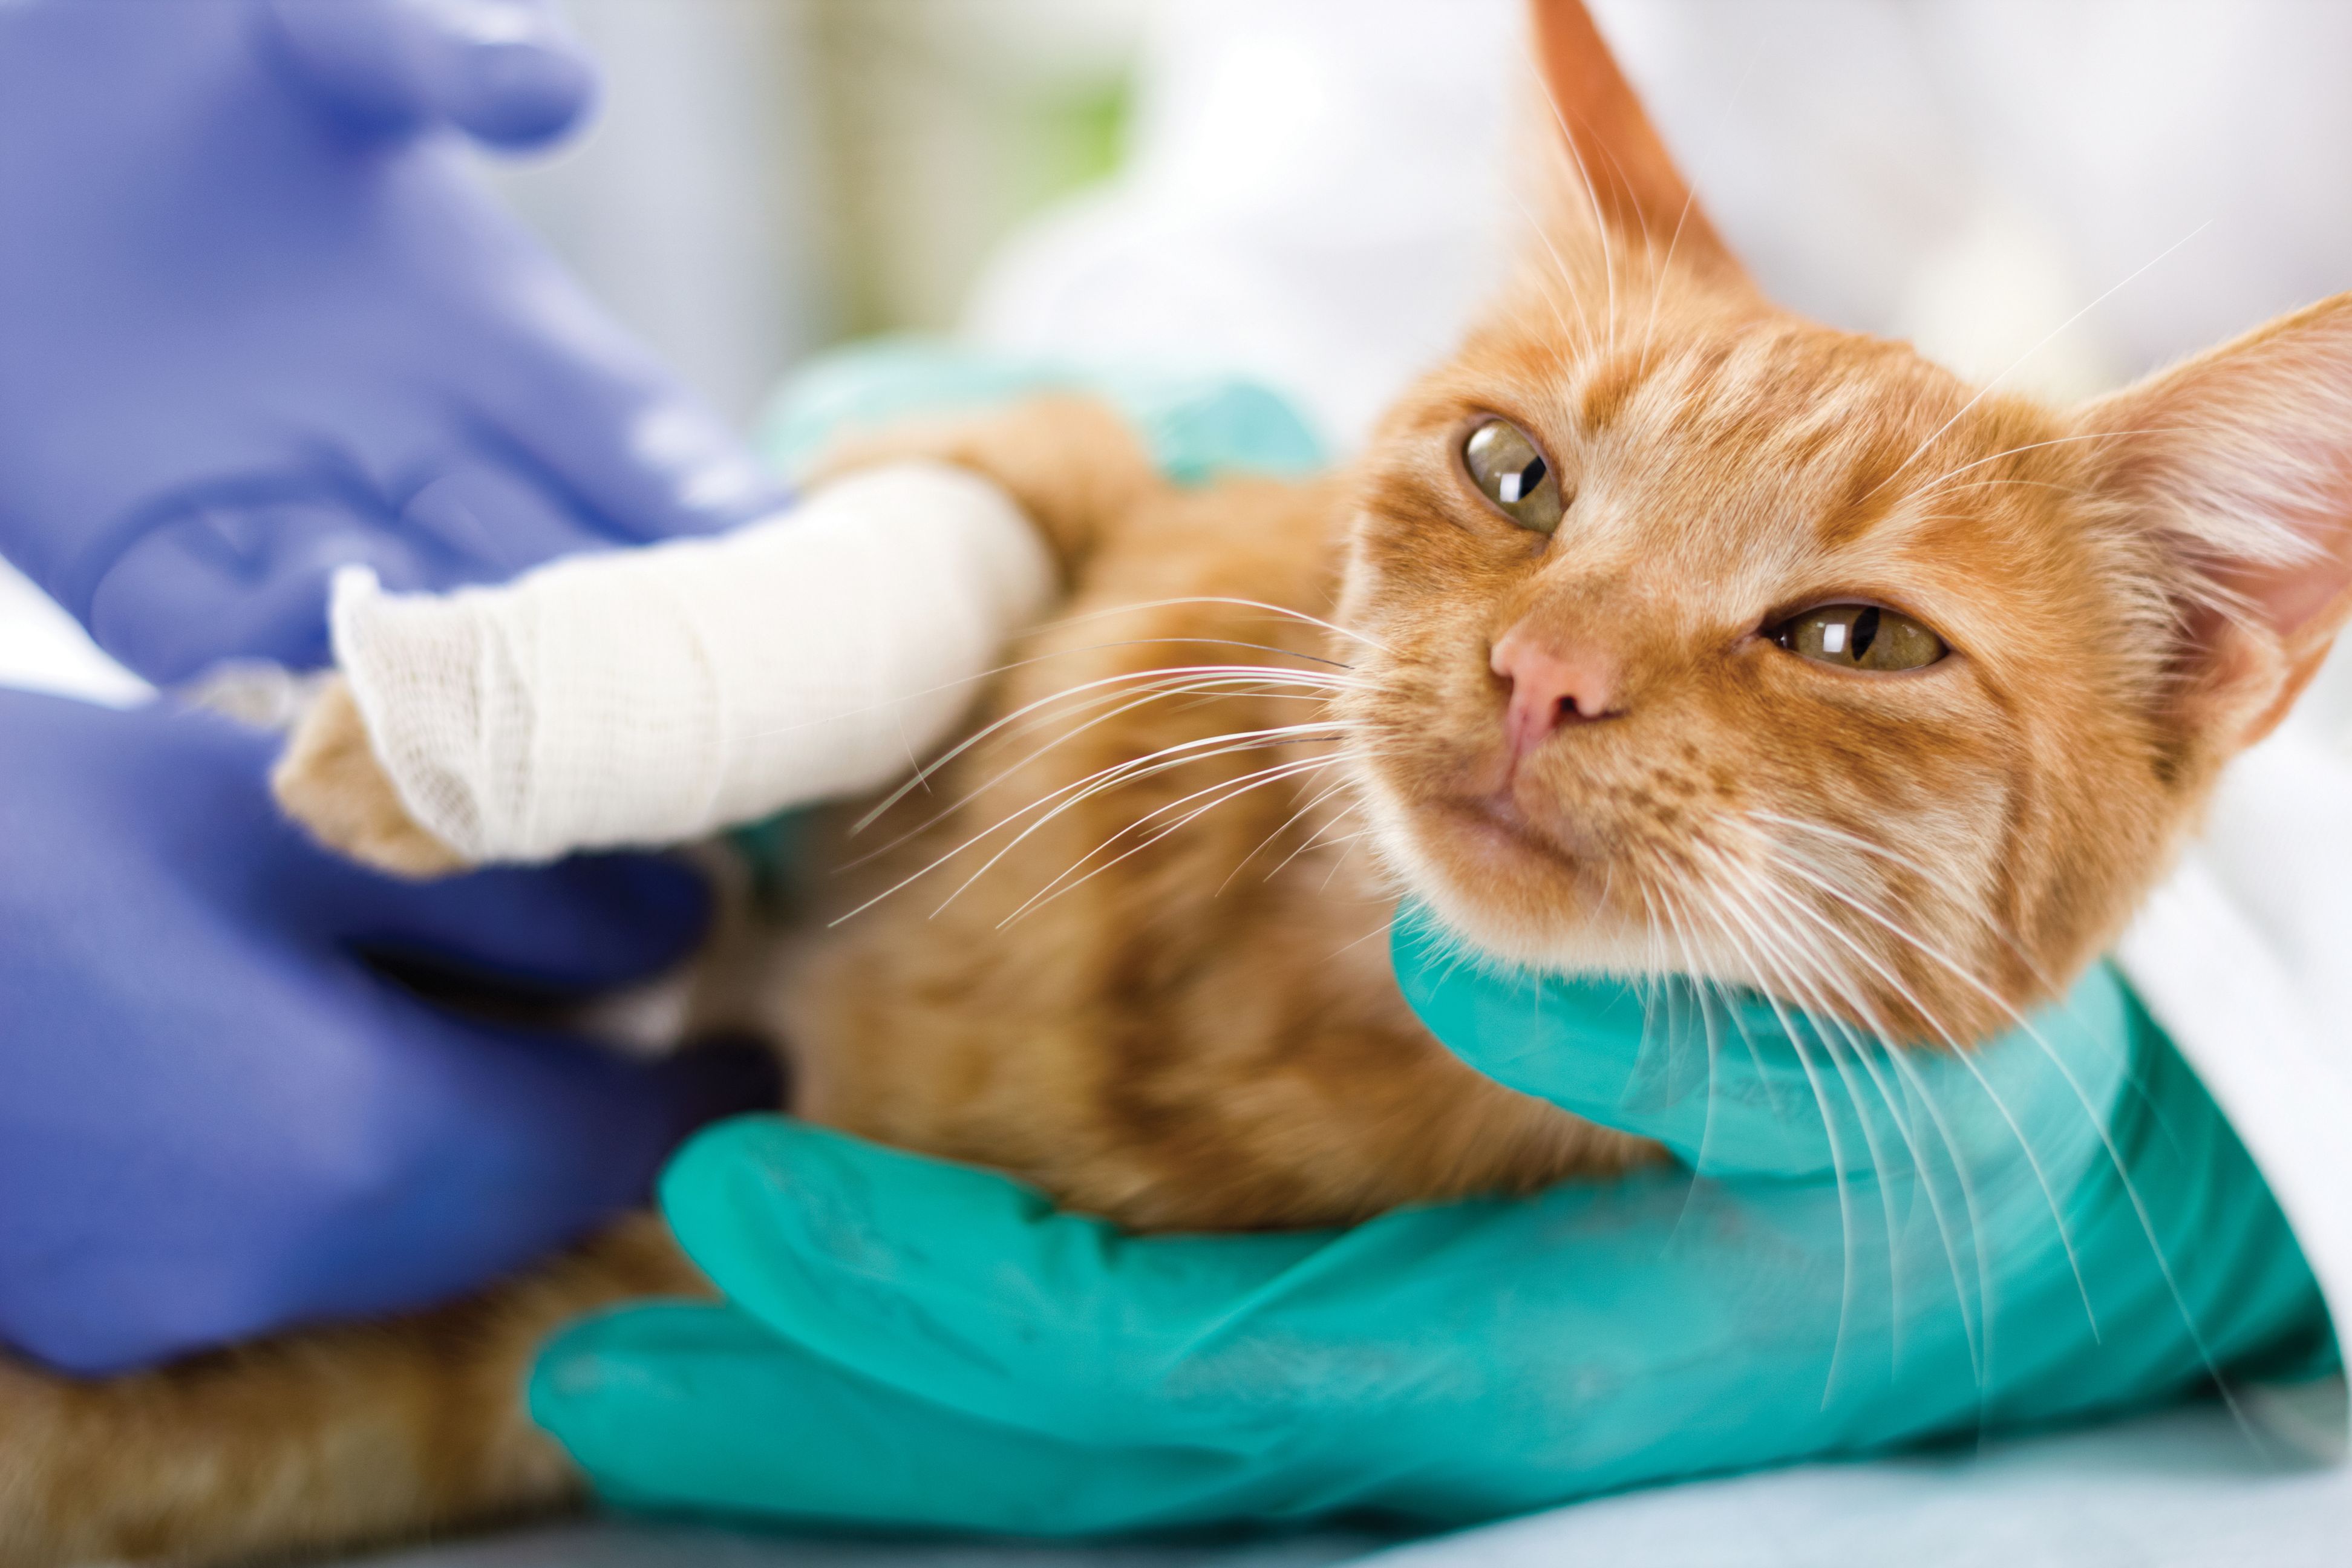 A Visit to a Veterinarian in Riverside, CA Can Resolve Many Common Pet Problems